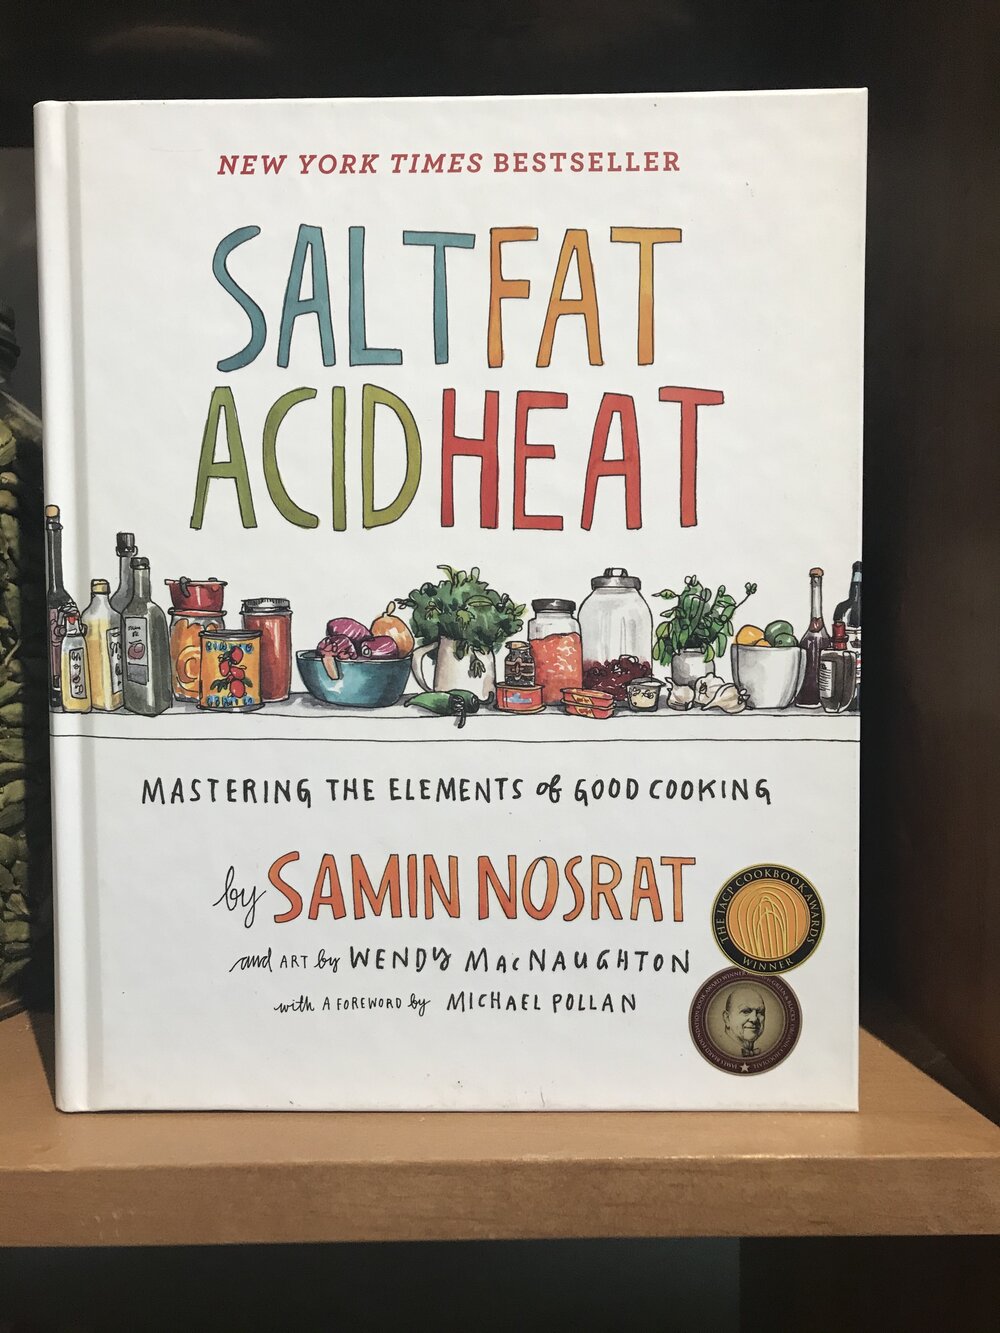 Salt Fat Acid Heat: Mastering the Elements of Good Cooking by Samin Nosrat  — Allspicery